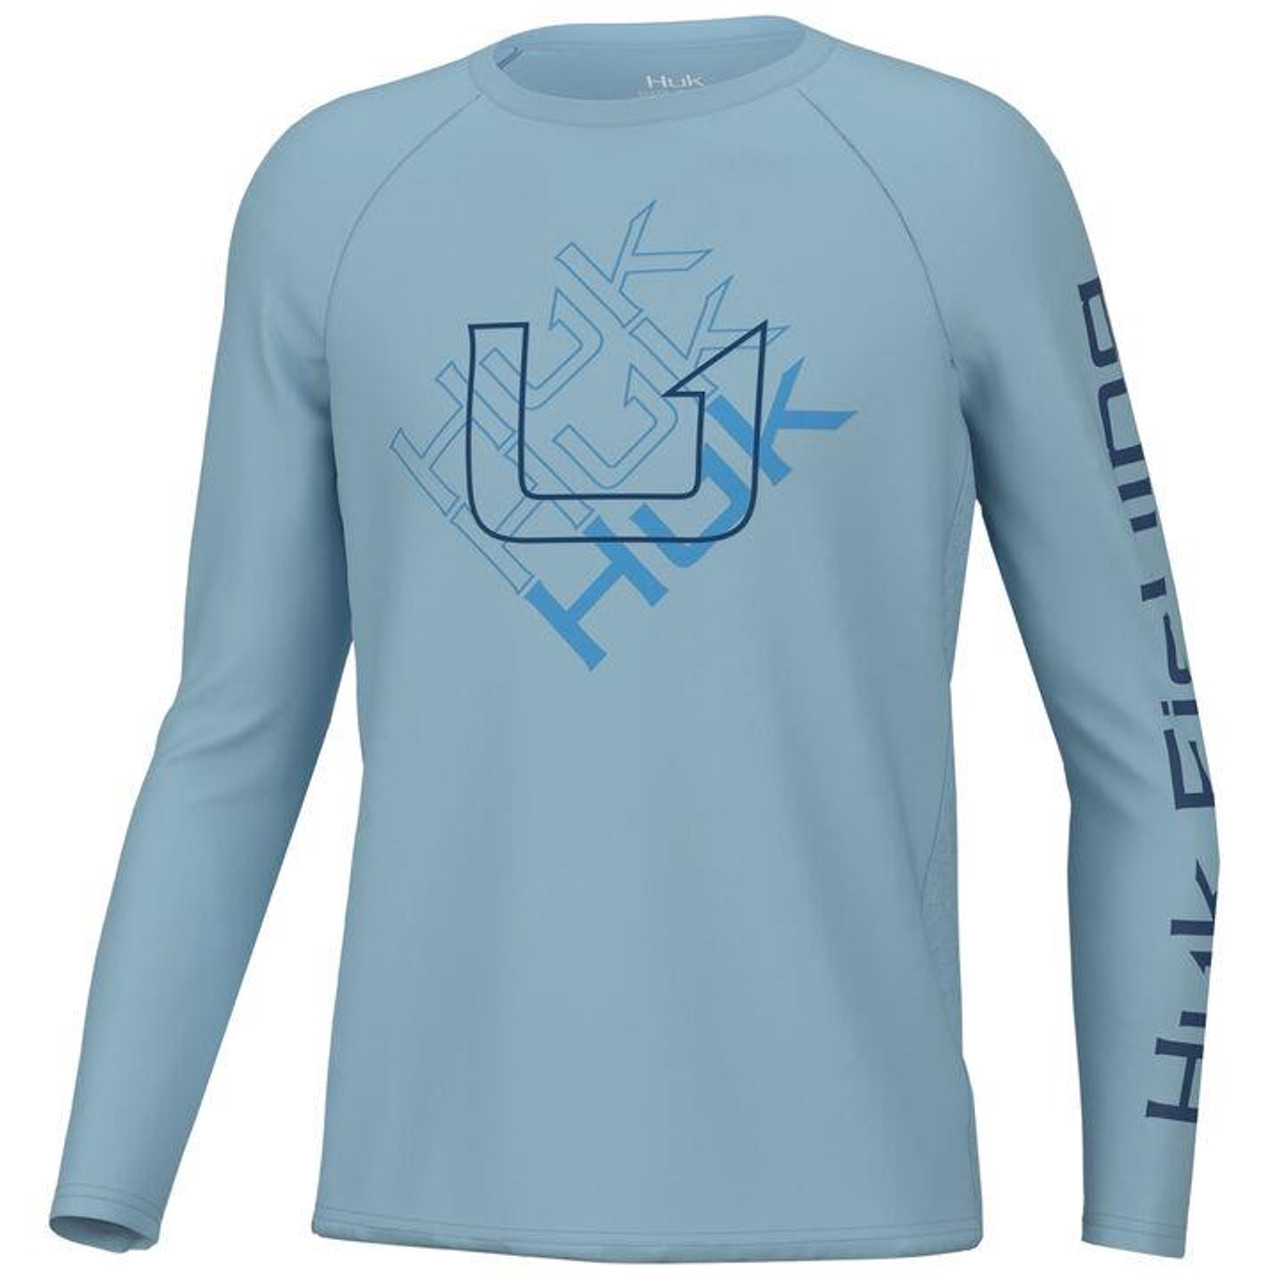 Huk Youth Pursuit Solar Time Shirt - Long Sleeve - Crystal Blue